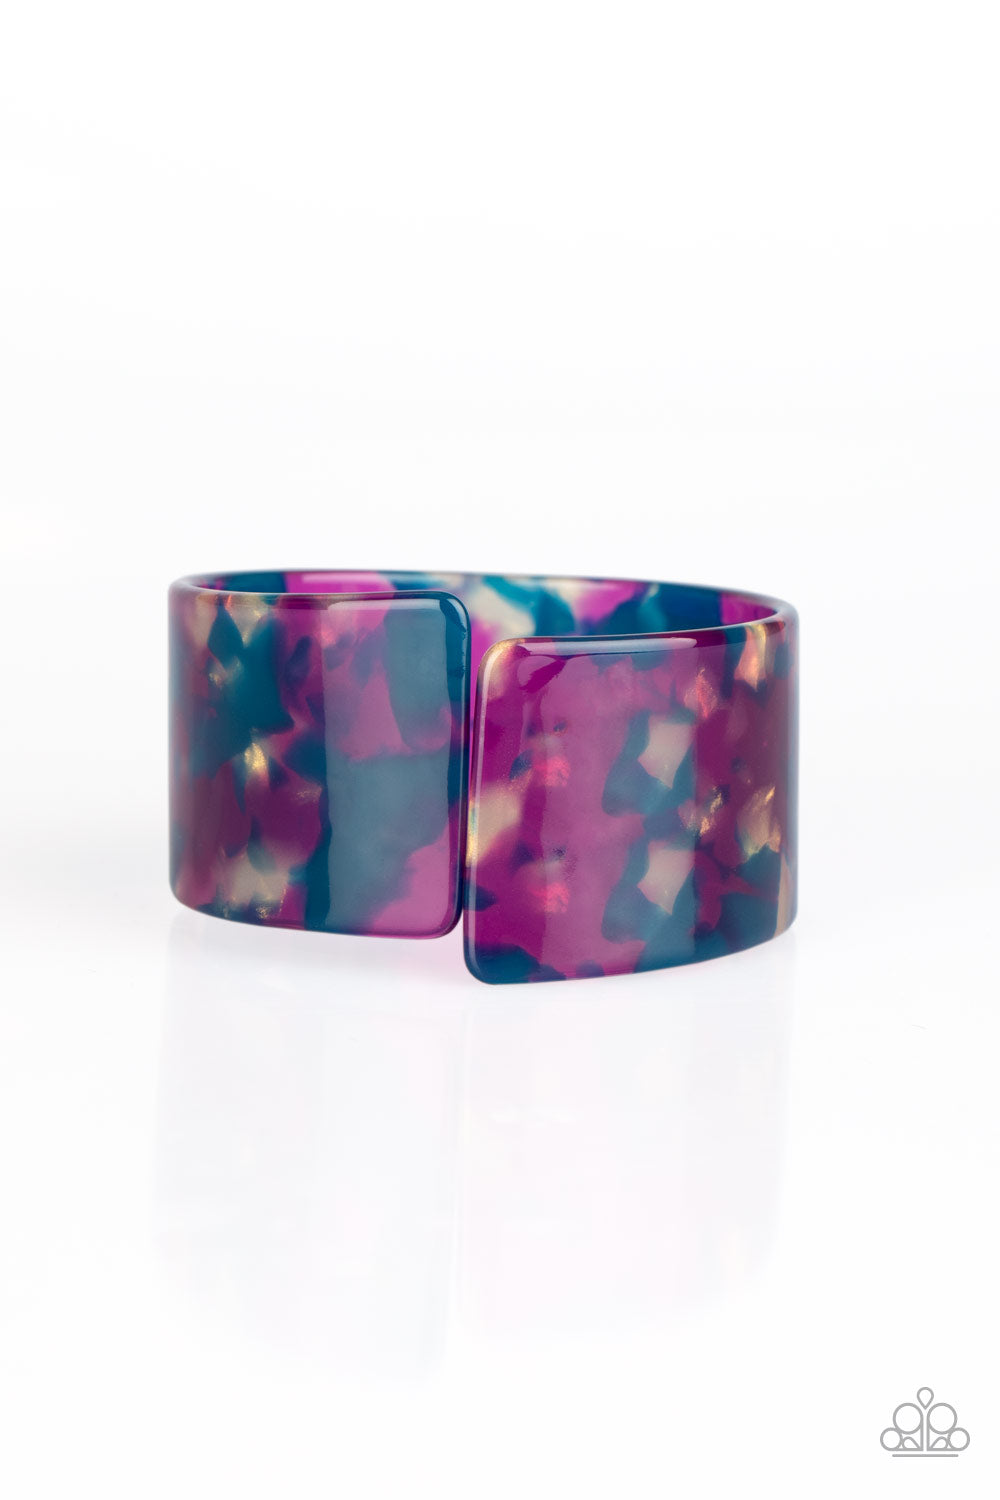 &lt;P&gt;Smudged in blue and purple, an iridescent acrylic cuff asymmetrically wraps around the wrist, creating a tilted opening for a retro finish.&lt;/P&gt;  

&lt;P&gt; &lt;I&gt;Sold as one individual bracelet.&lt;/I&gt;  &lt;/P&gt;


&lt;img src=\&quot;https://d9b54x484lq62.cloudfront.net/paparazzi/shopping/images/517_tag150x115_1.png\&quot; alt=\&quot;New Kit\&quot; align=\&quot;middle\&quot; height=\&quot;50\&quot; width=\&quot;50\&quot;/&gt;